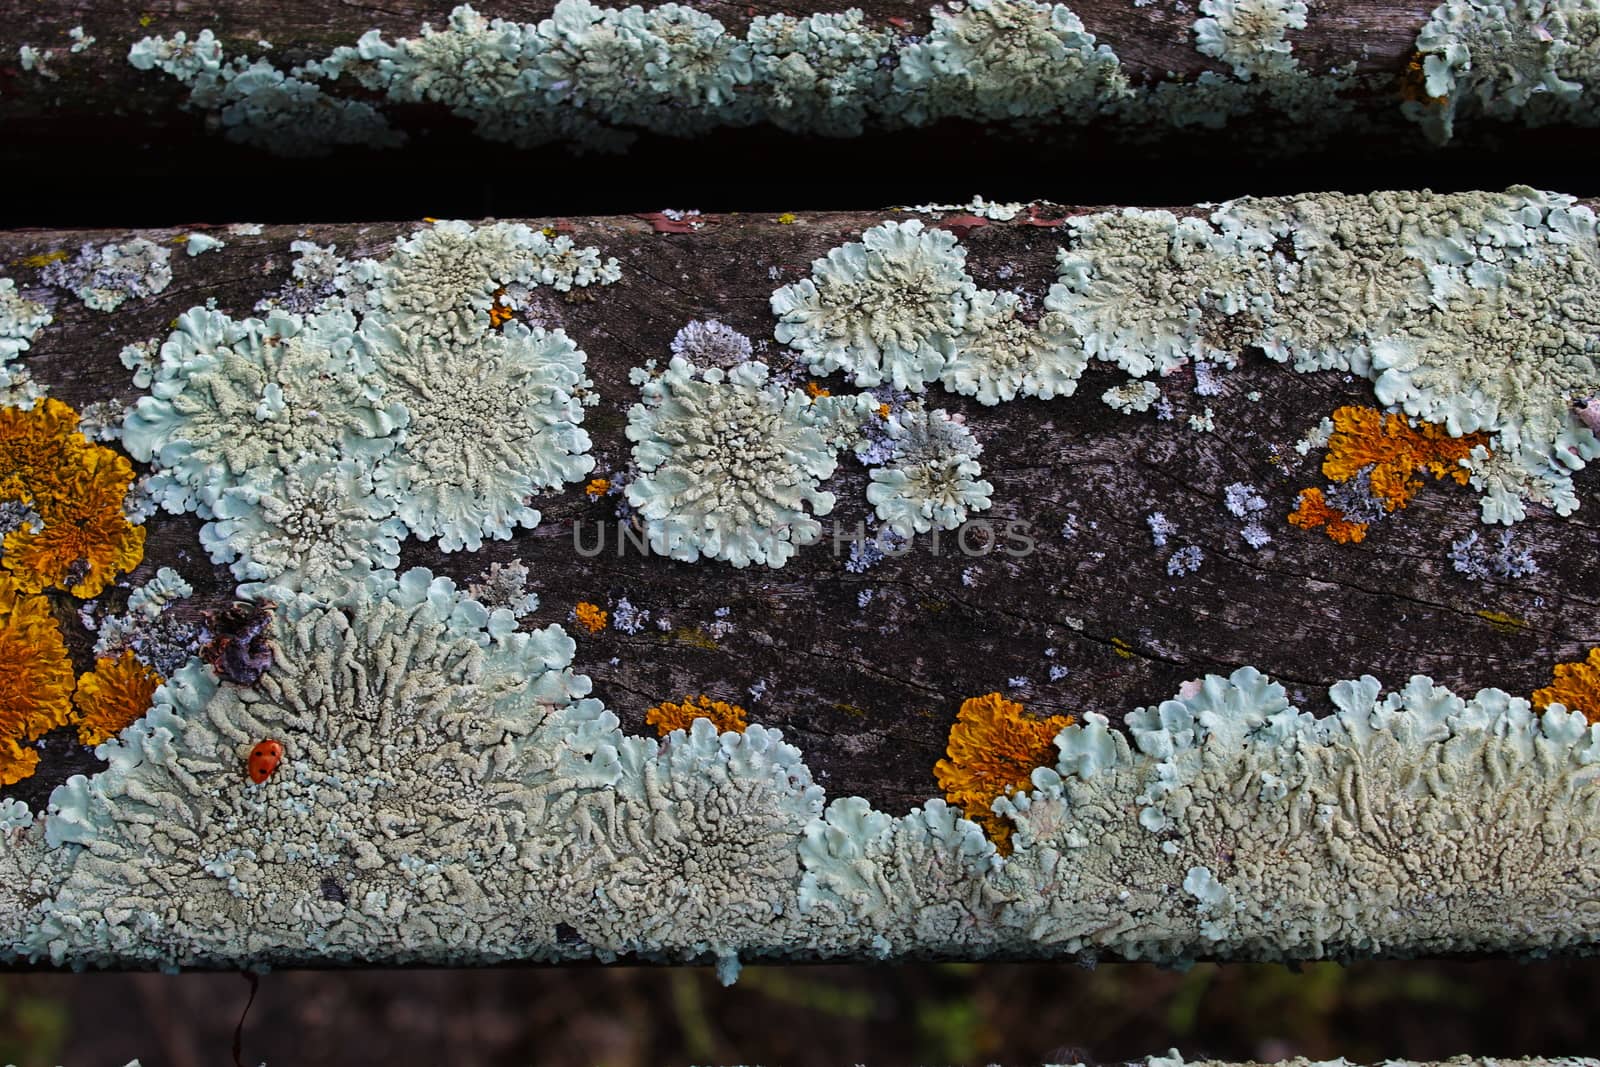 Yellow and white mold on the wooden bench. Beja, Portugal.